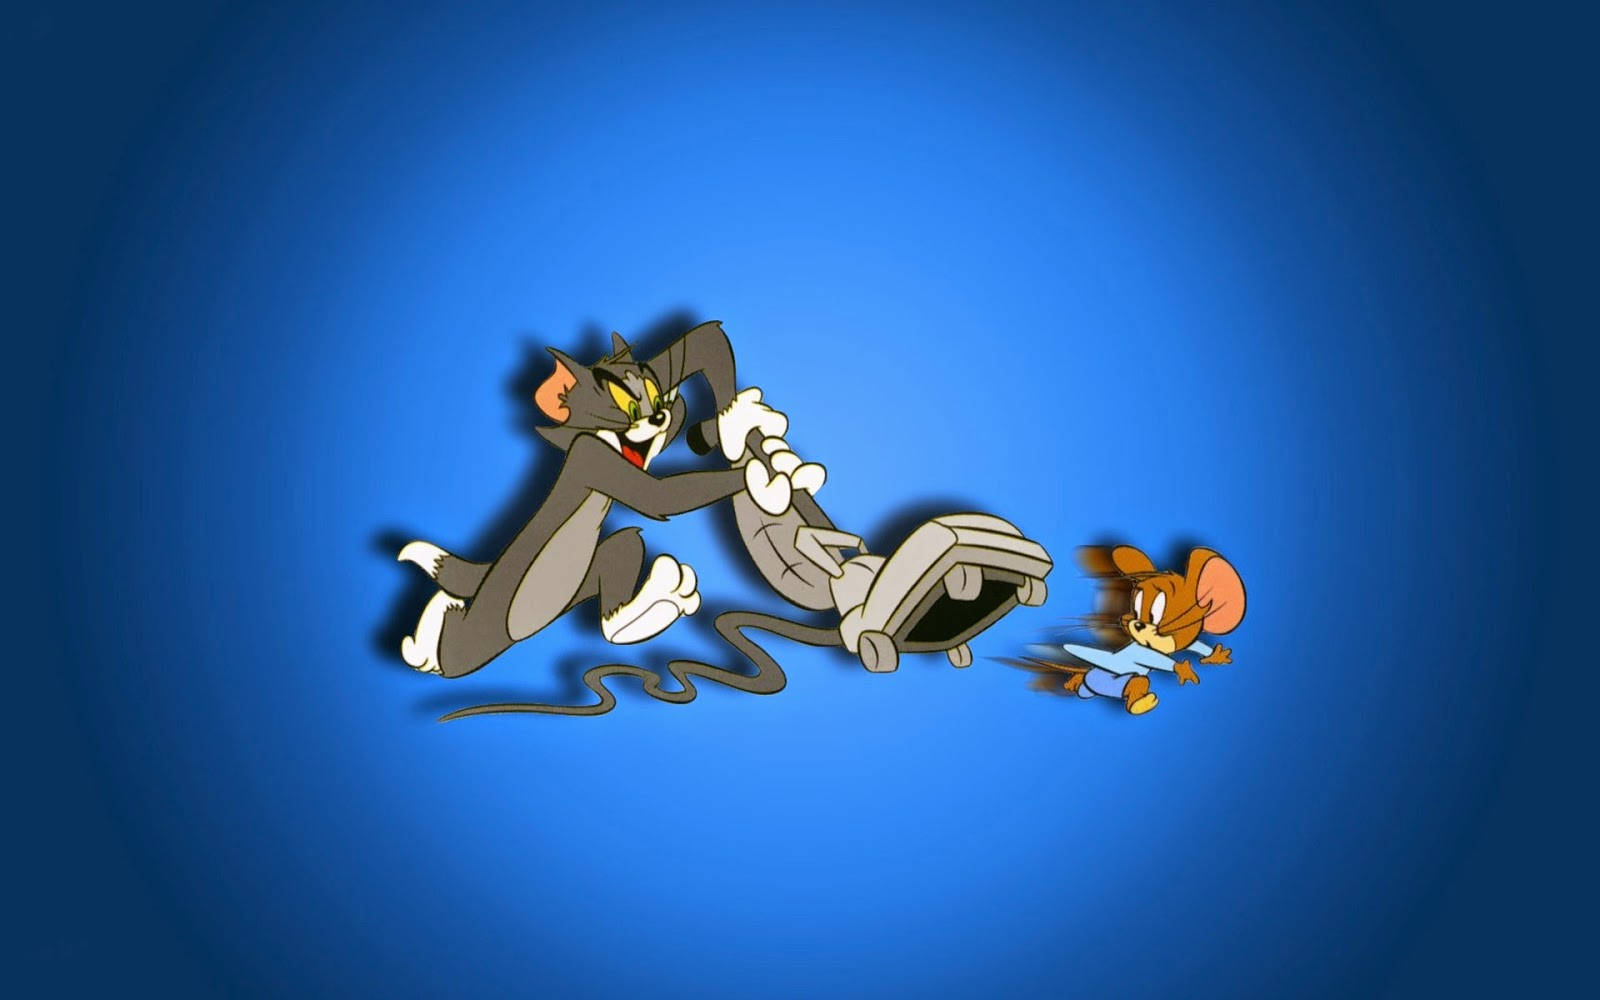 Tom And Jerry 4k wallpaper for desktop and mobile phone